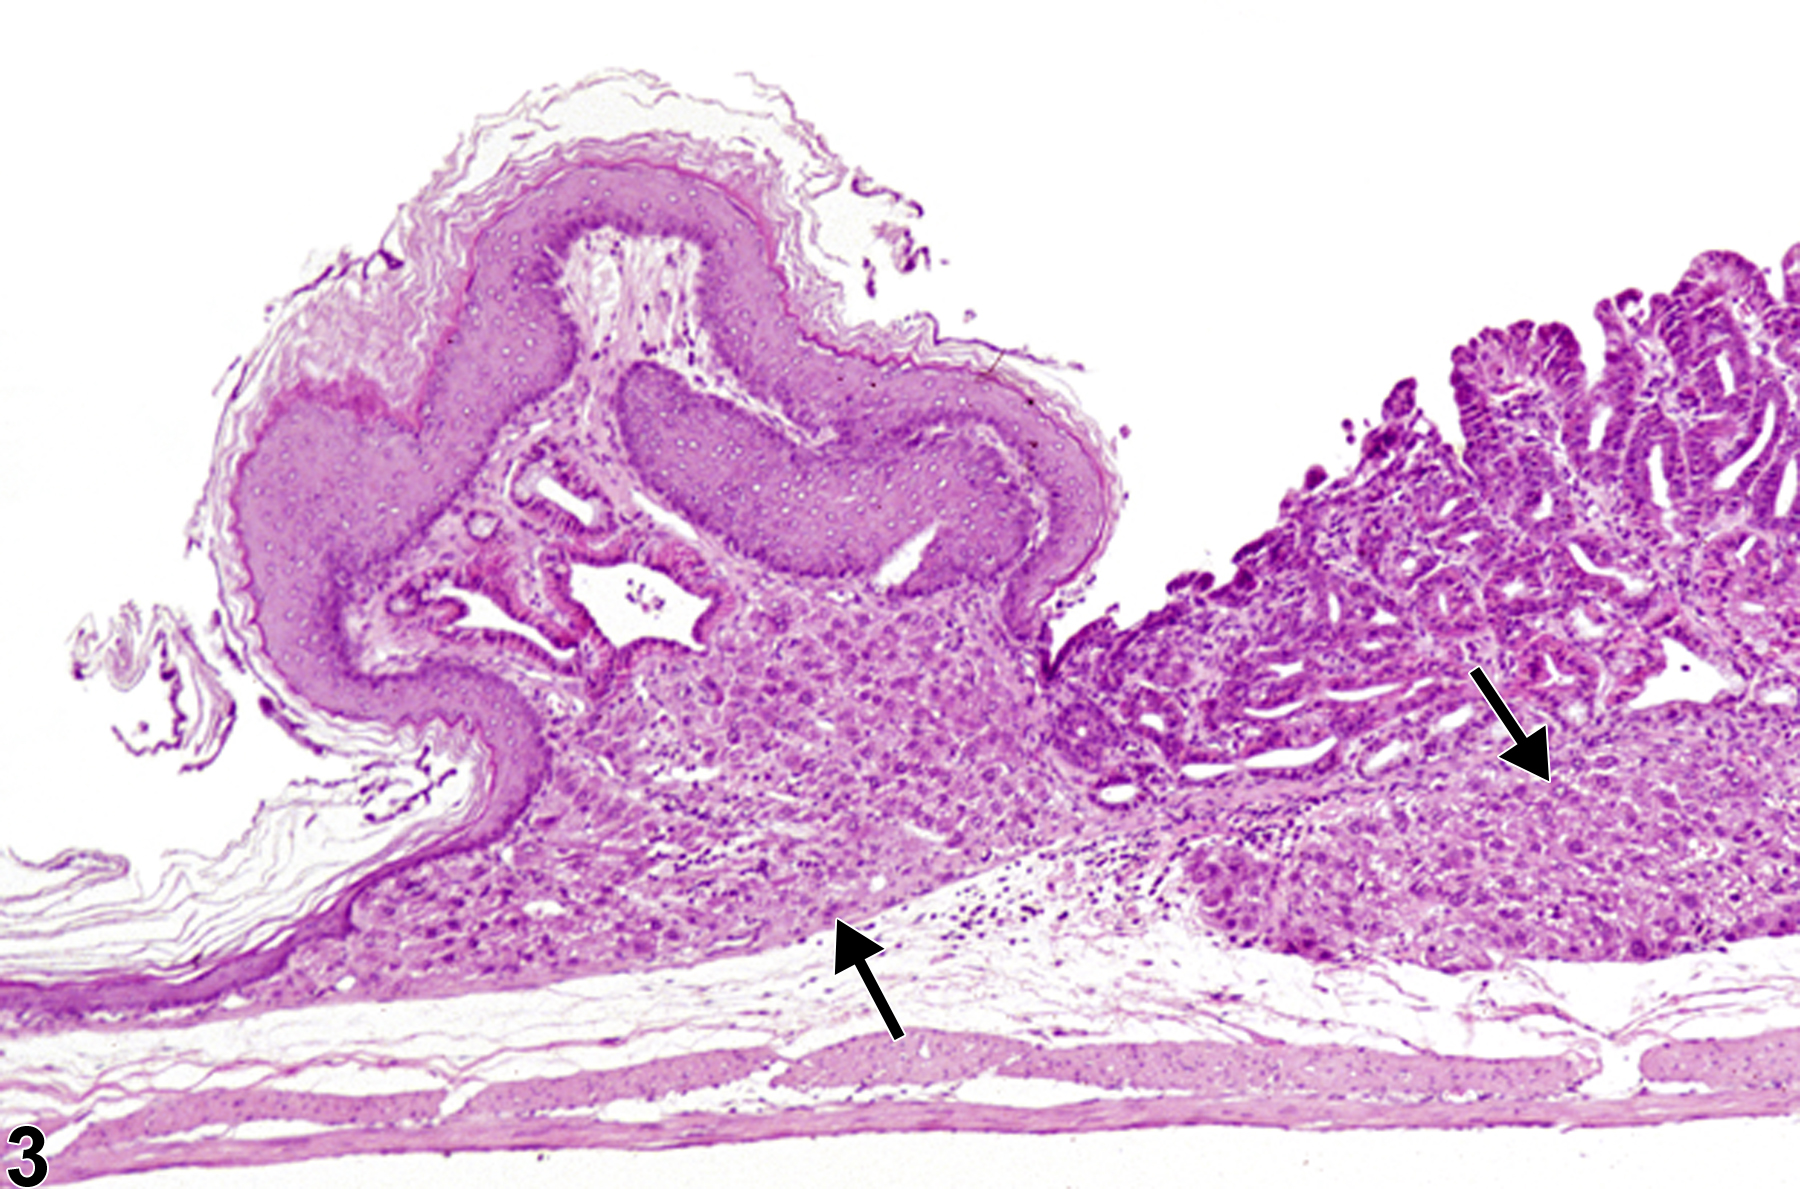 Image of ectopic tissue in the forestomach from a female F344/N rat in a chronic study